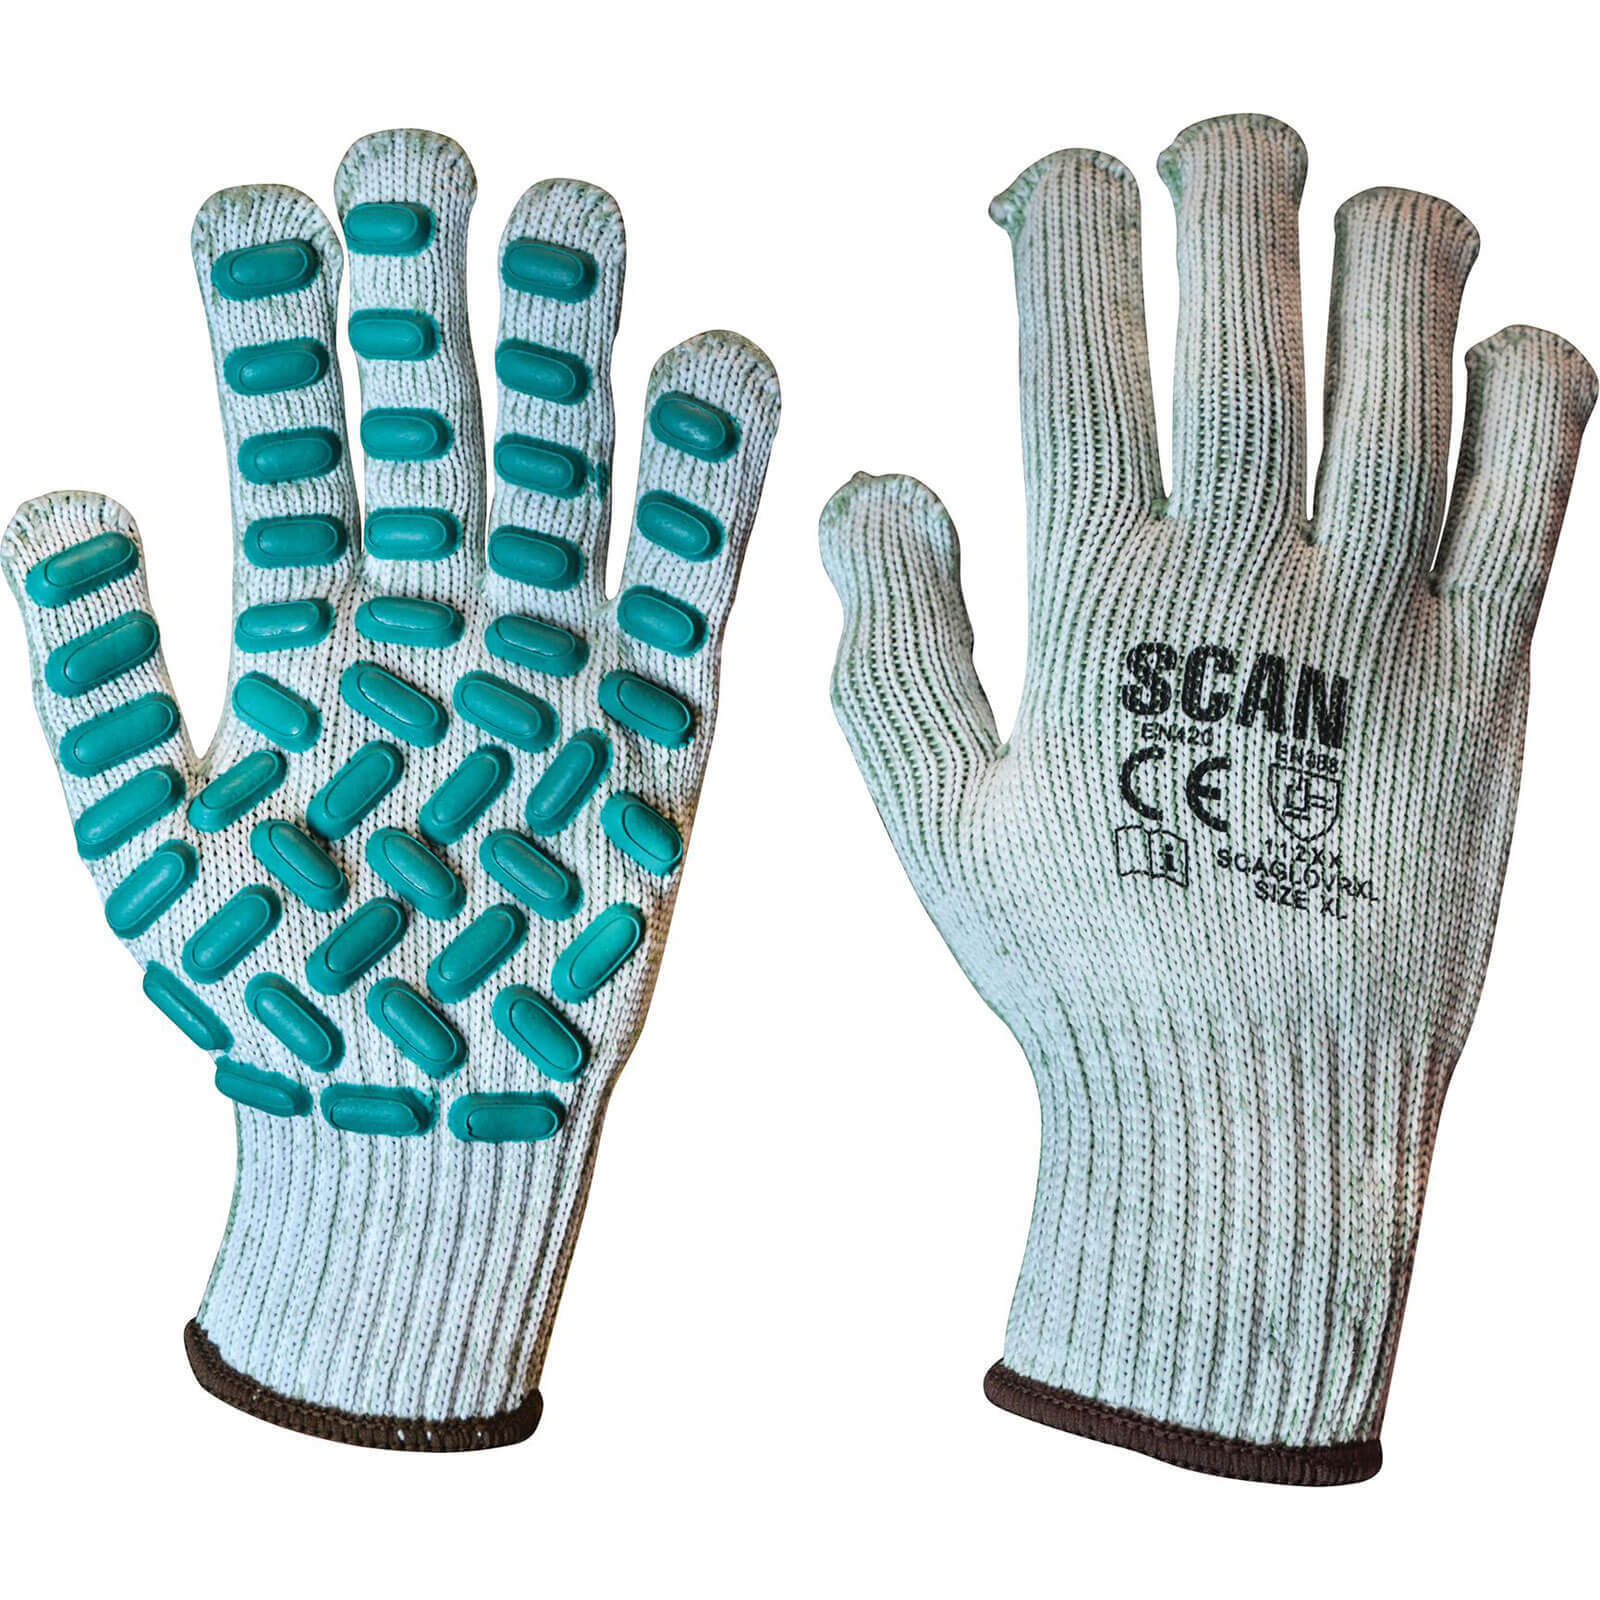 Image of Scan Vibration Resistant Latex Foam Gloves Grey / Green XL